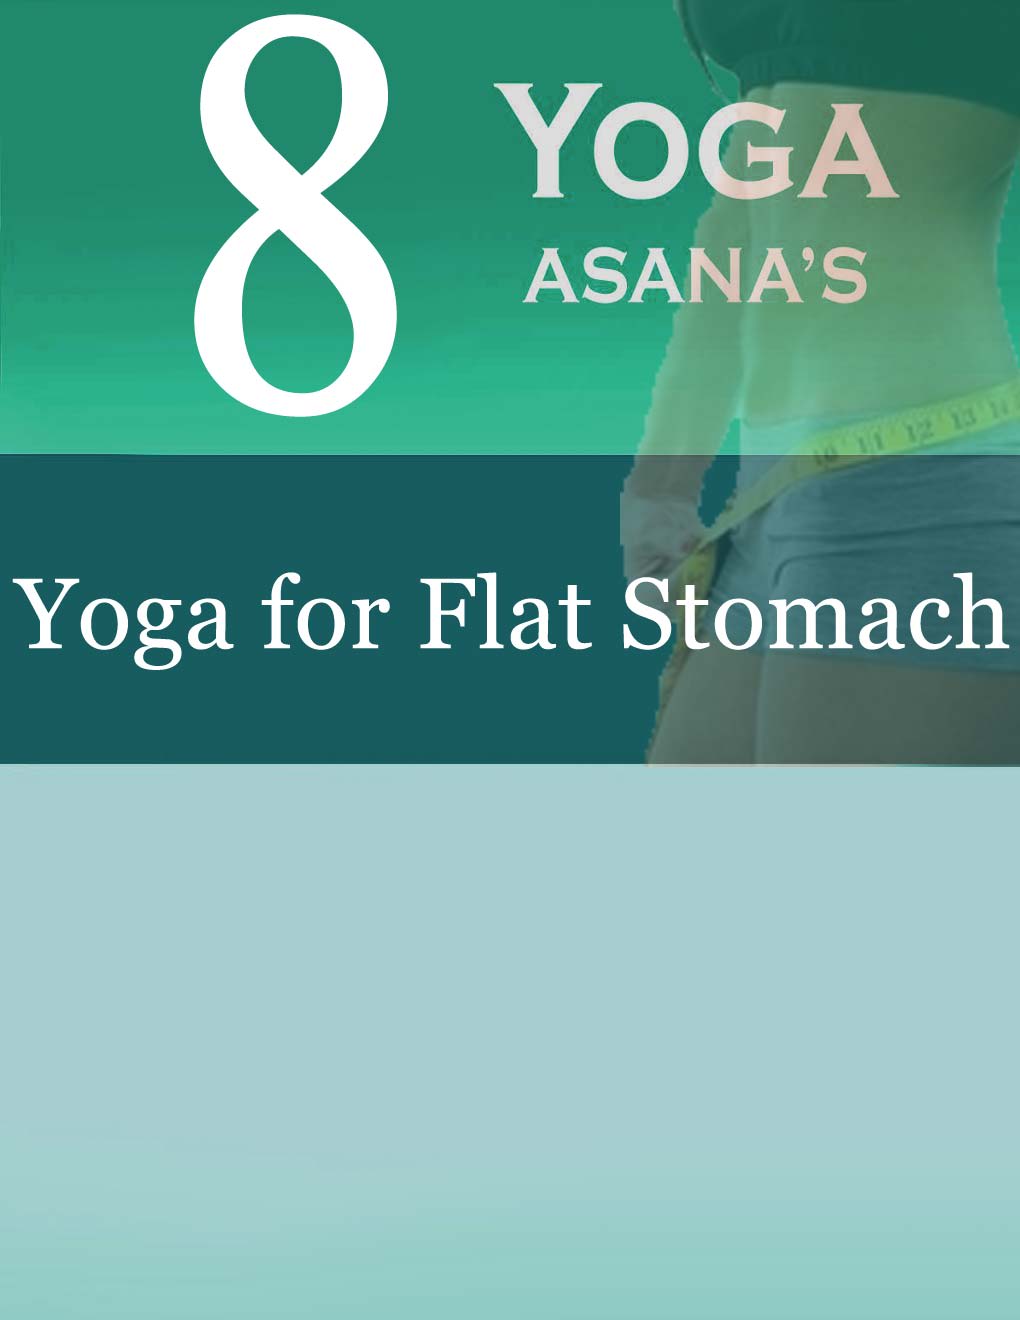 12 Yoga Poses To Reduce The Waist and Achieve A Flat Stomach at Home | PDF  | Abdomen | Human Anatomy